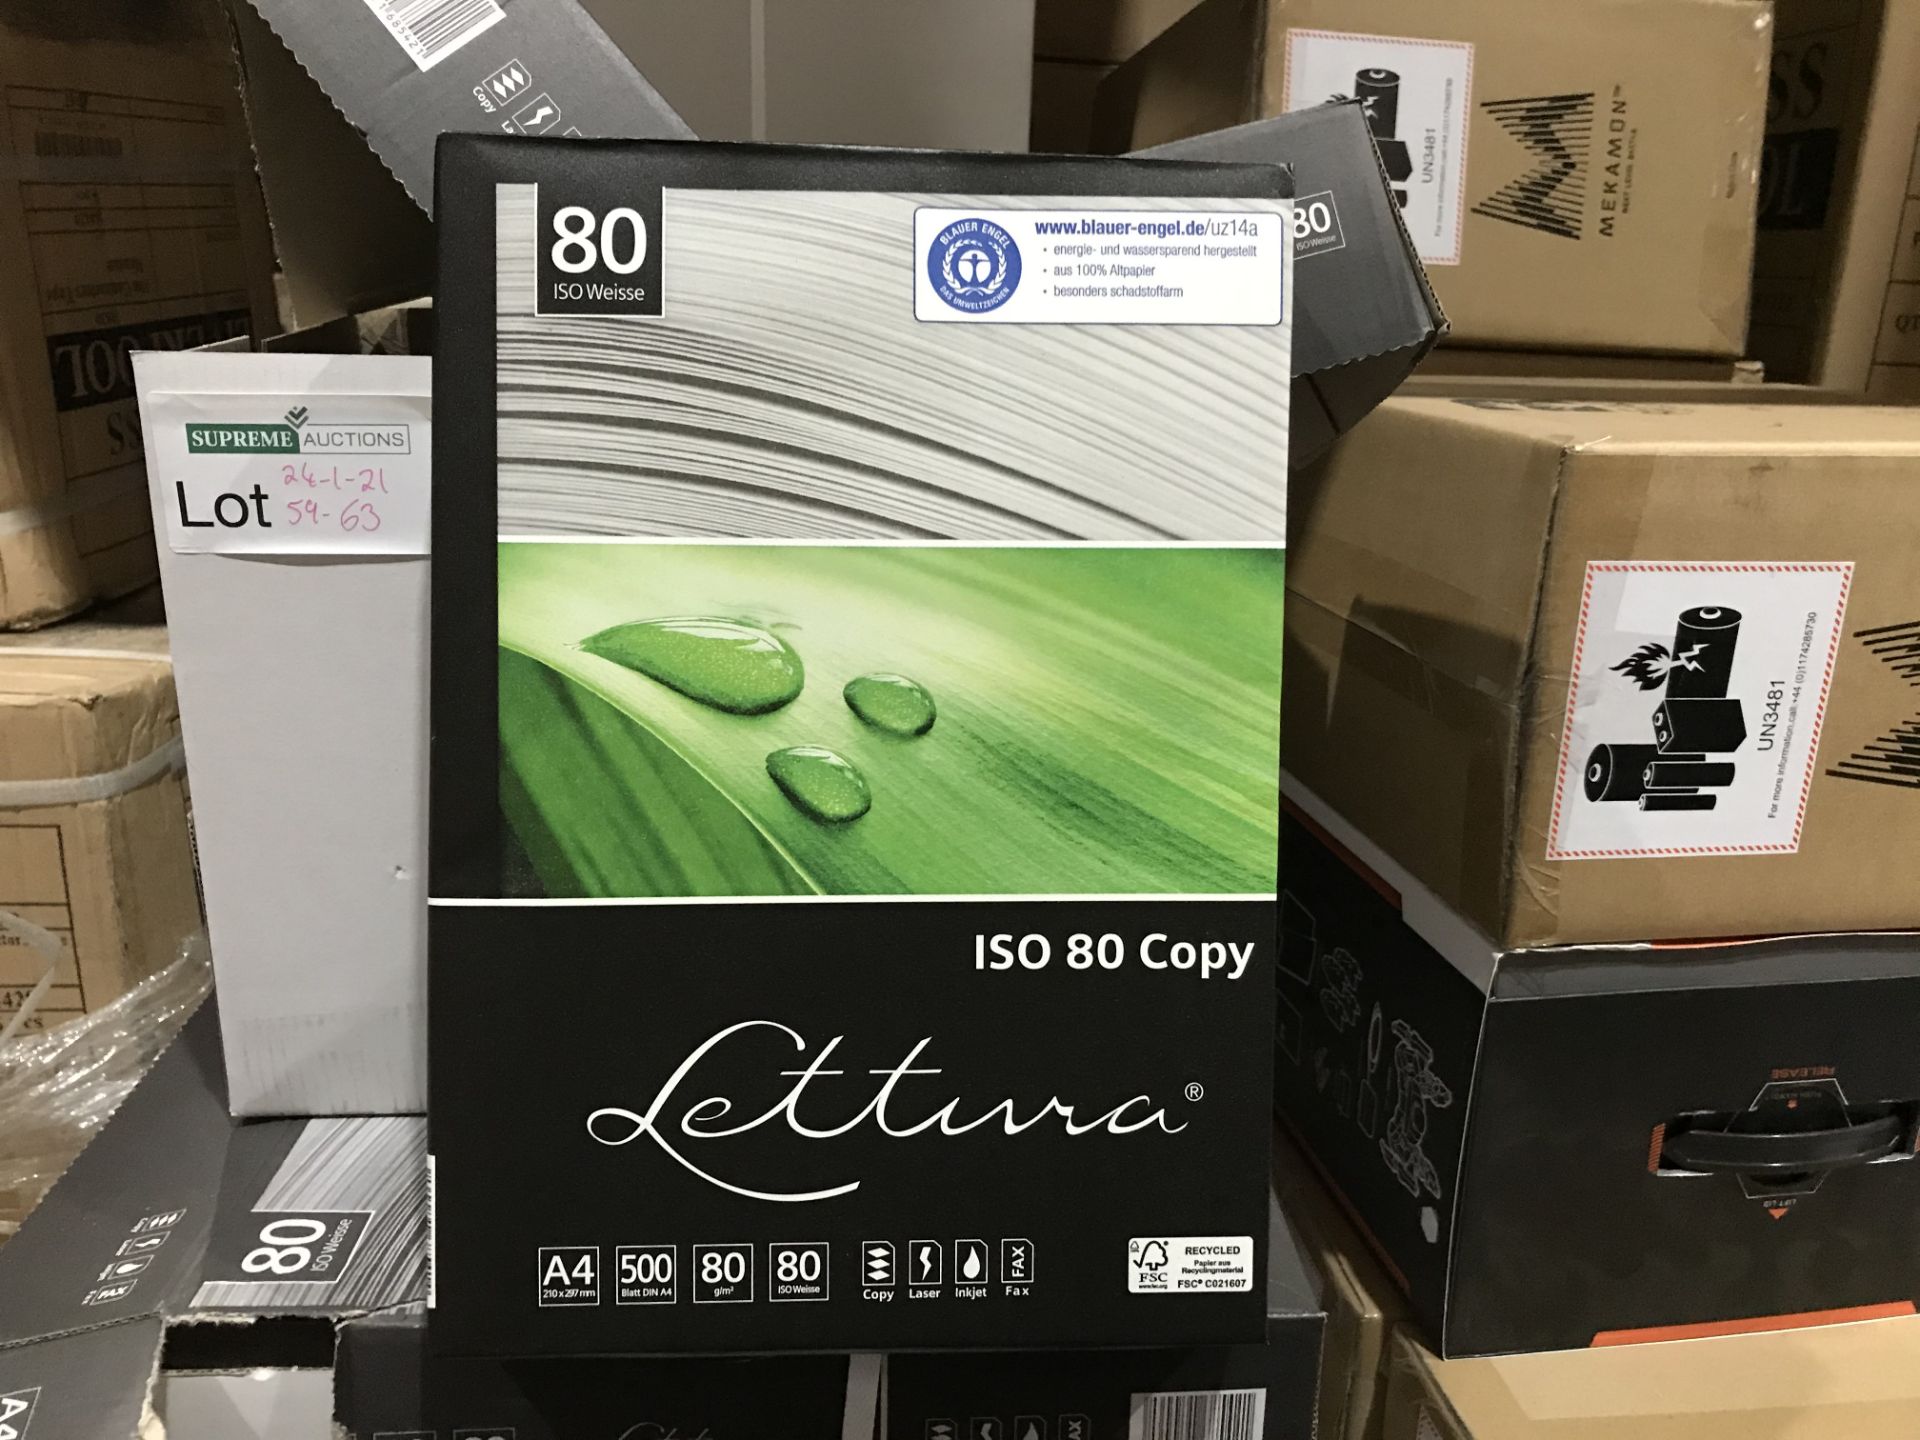 10 X PACKS OF 500 A4 PAPER IN 2 BOXES